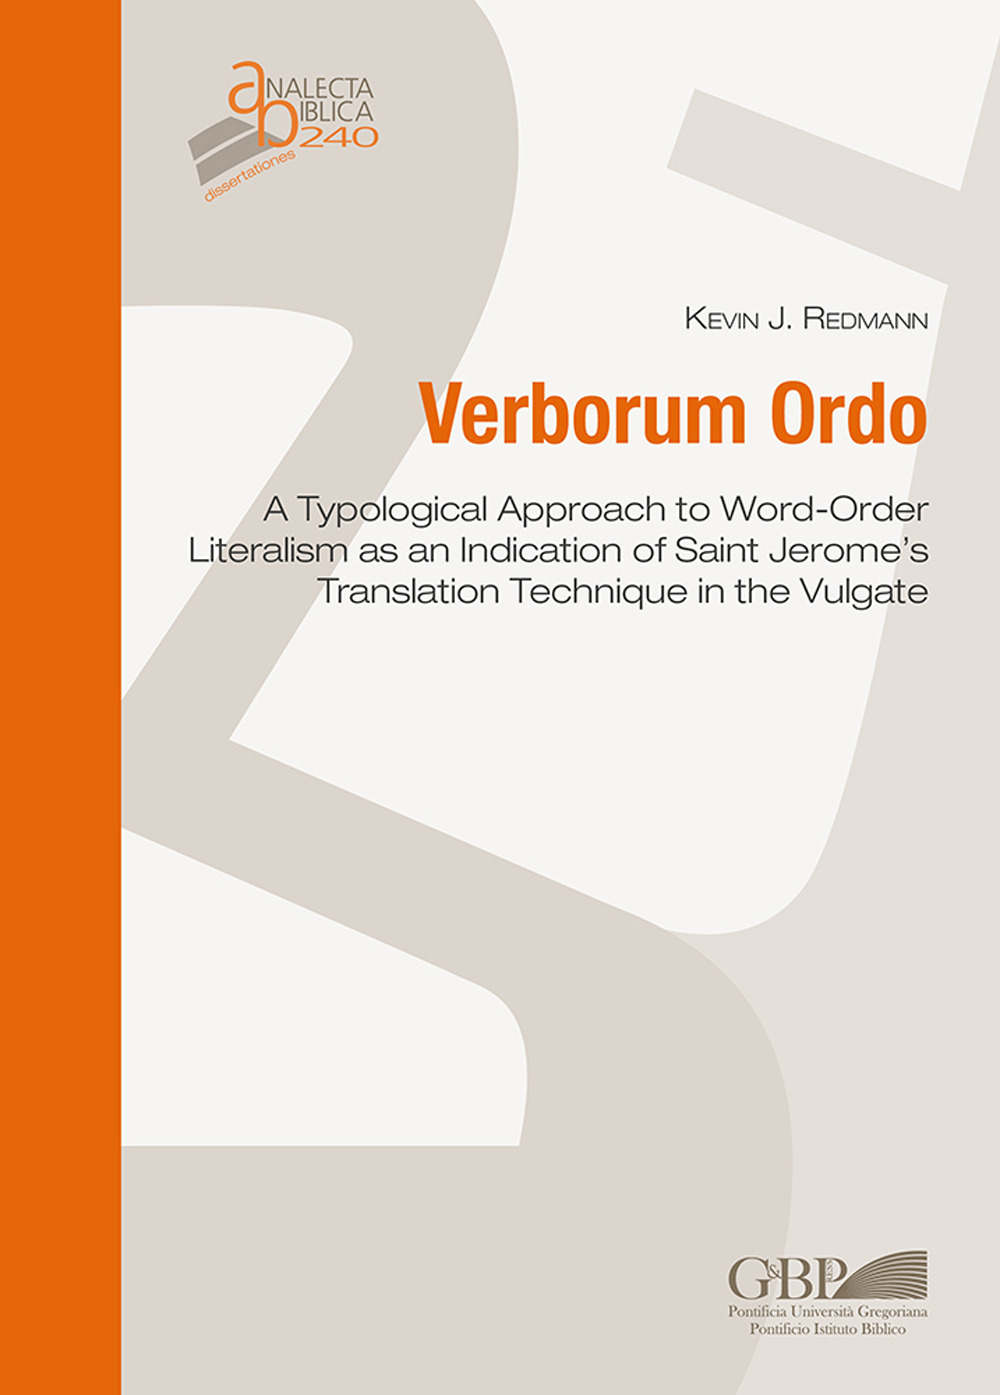 Verborum ordo. A typological approach to word-order literalism as an indication of Saint Jerome's translation technique in the vulgate